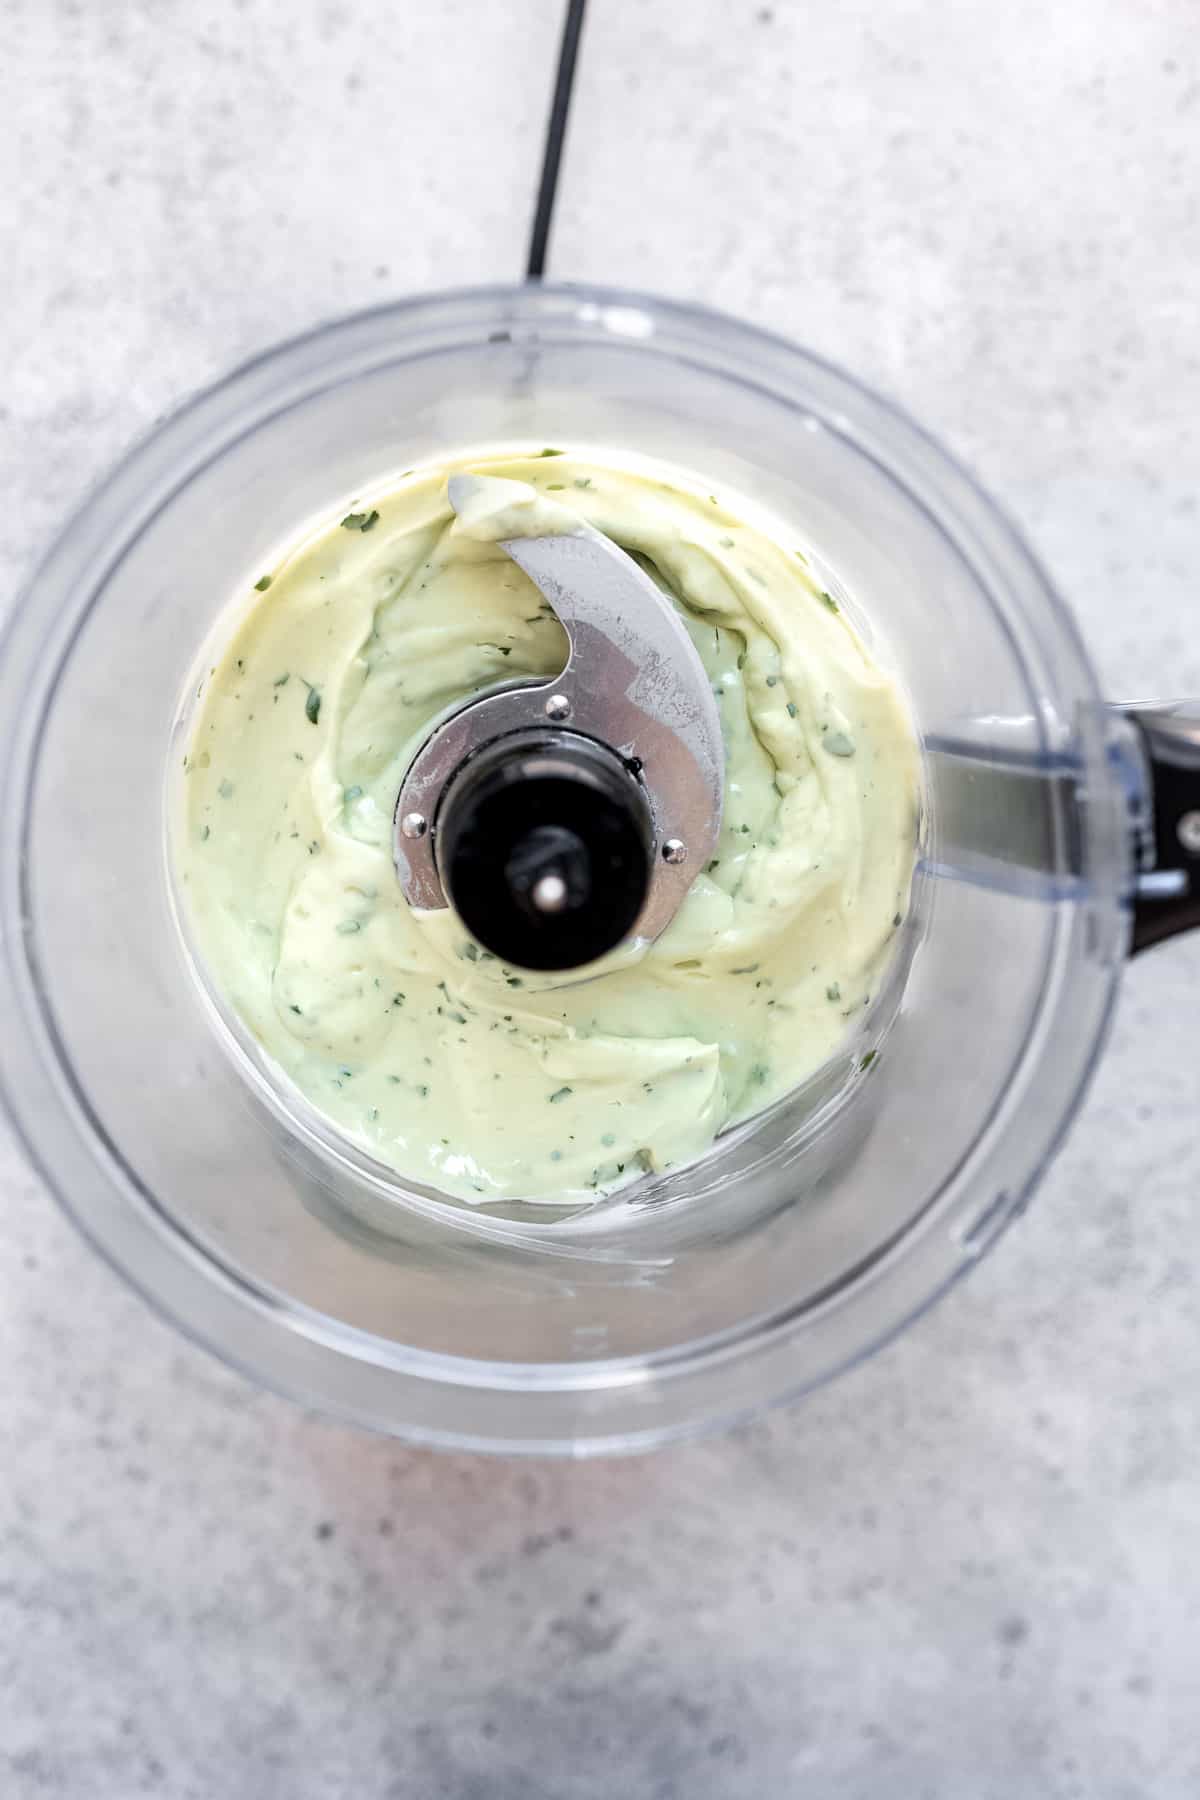 Blended avocado lime crema sauce in the food processor.